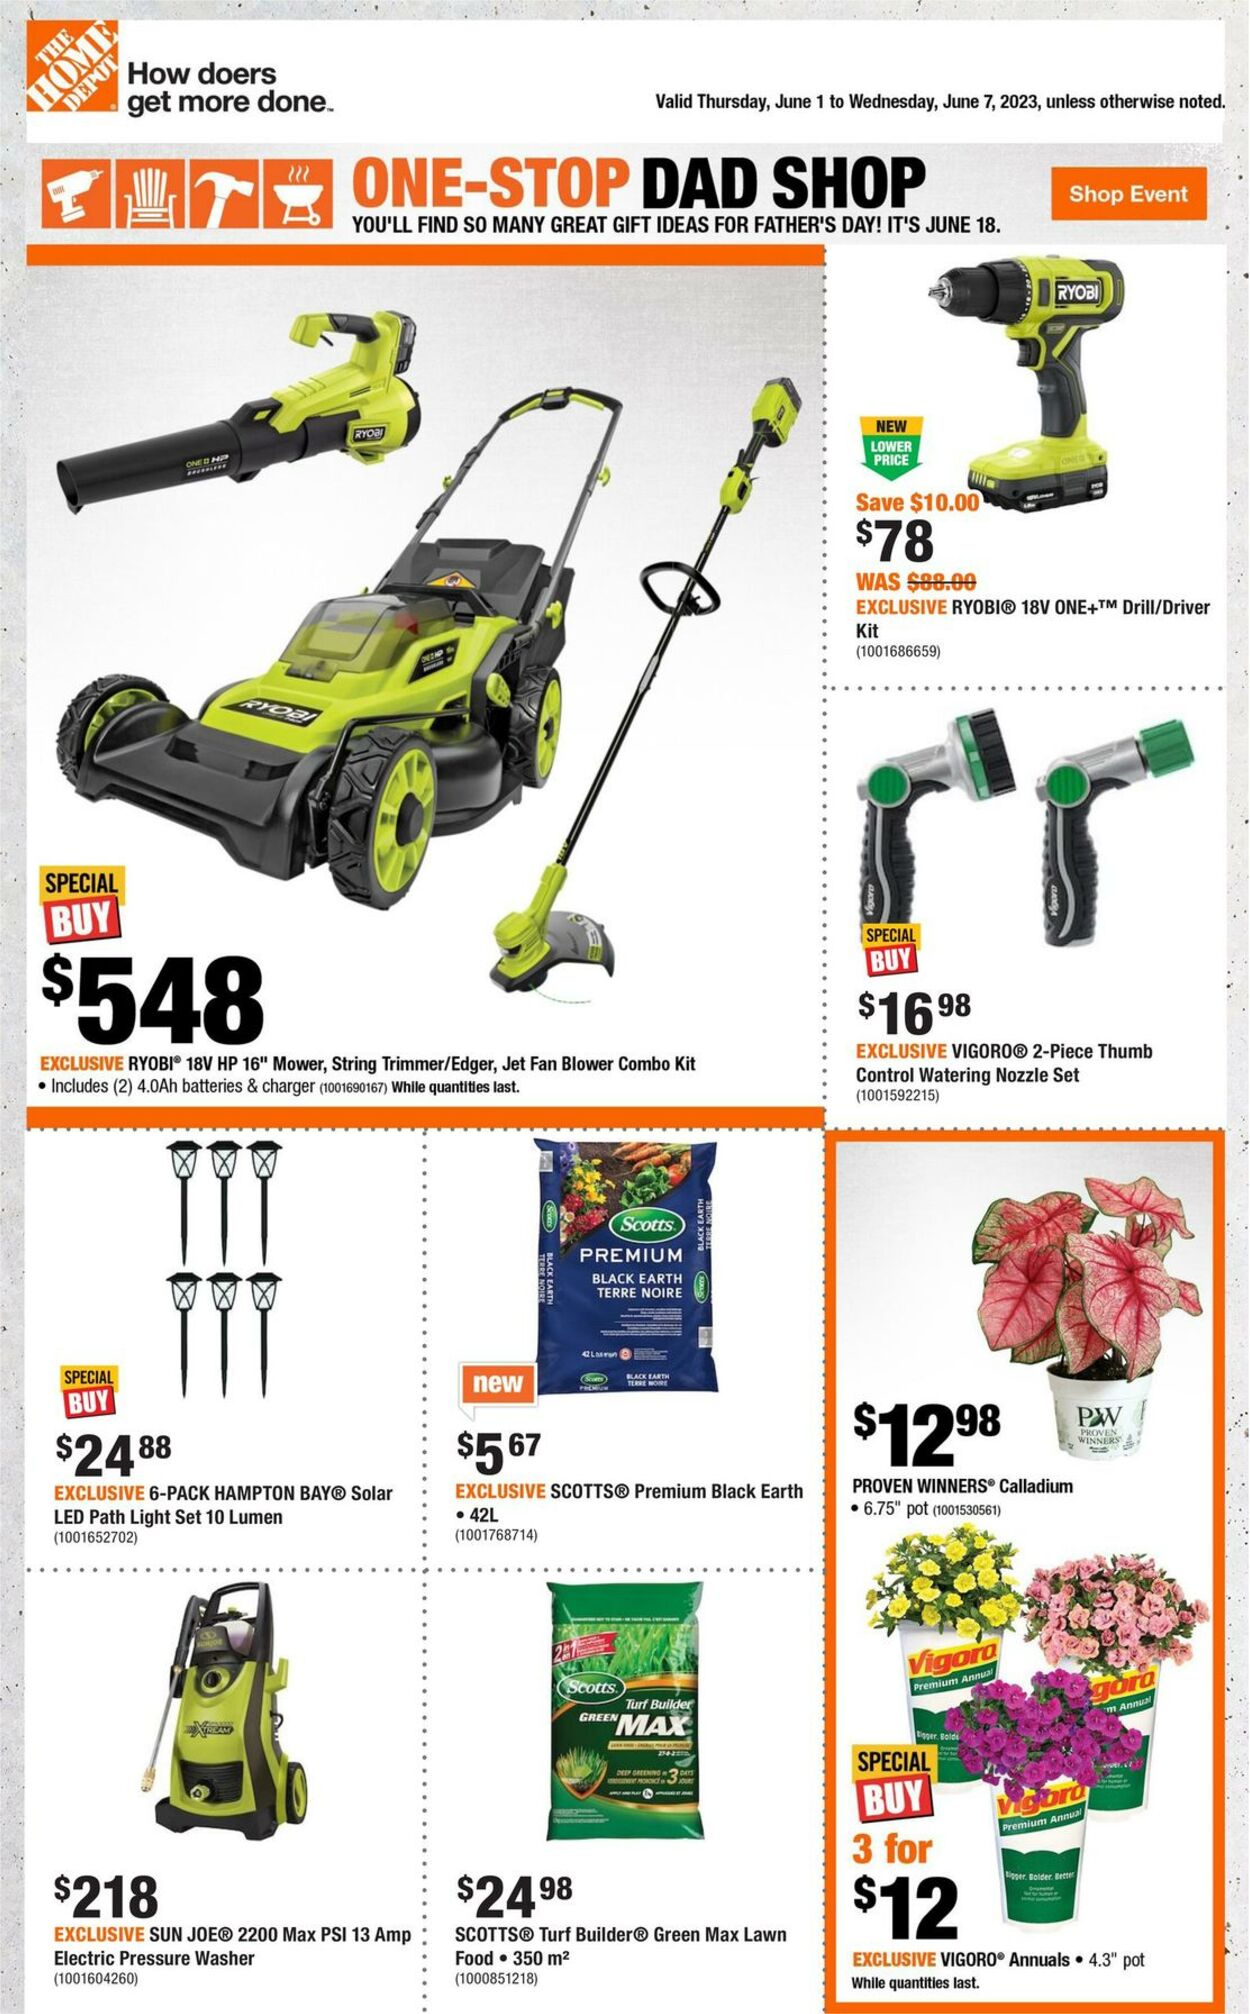 Home Depot Promotional Flyer Father's Day Valid from 01.06 to 07.06